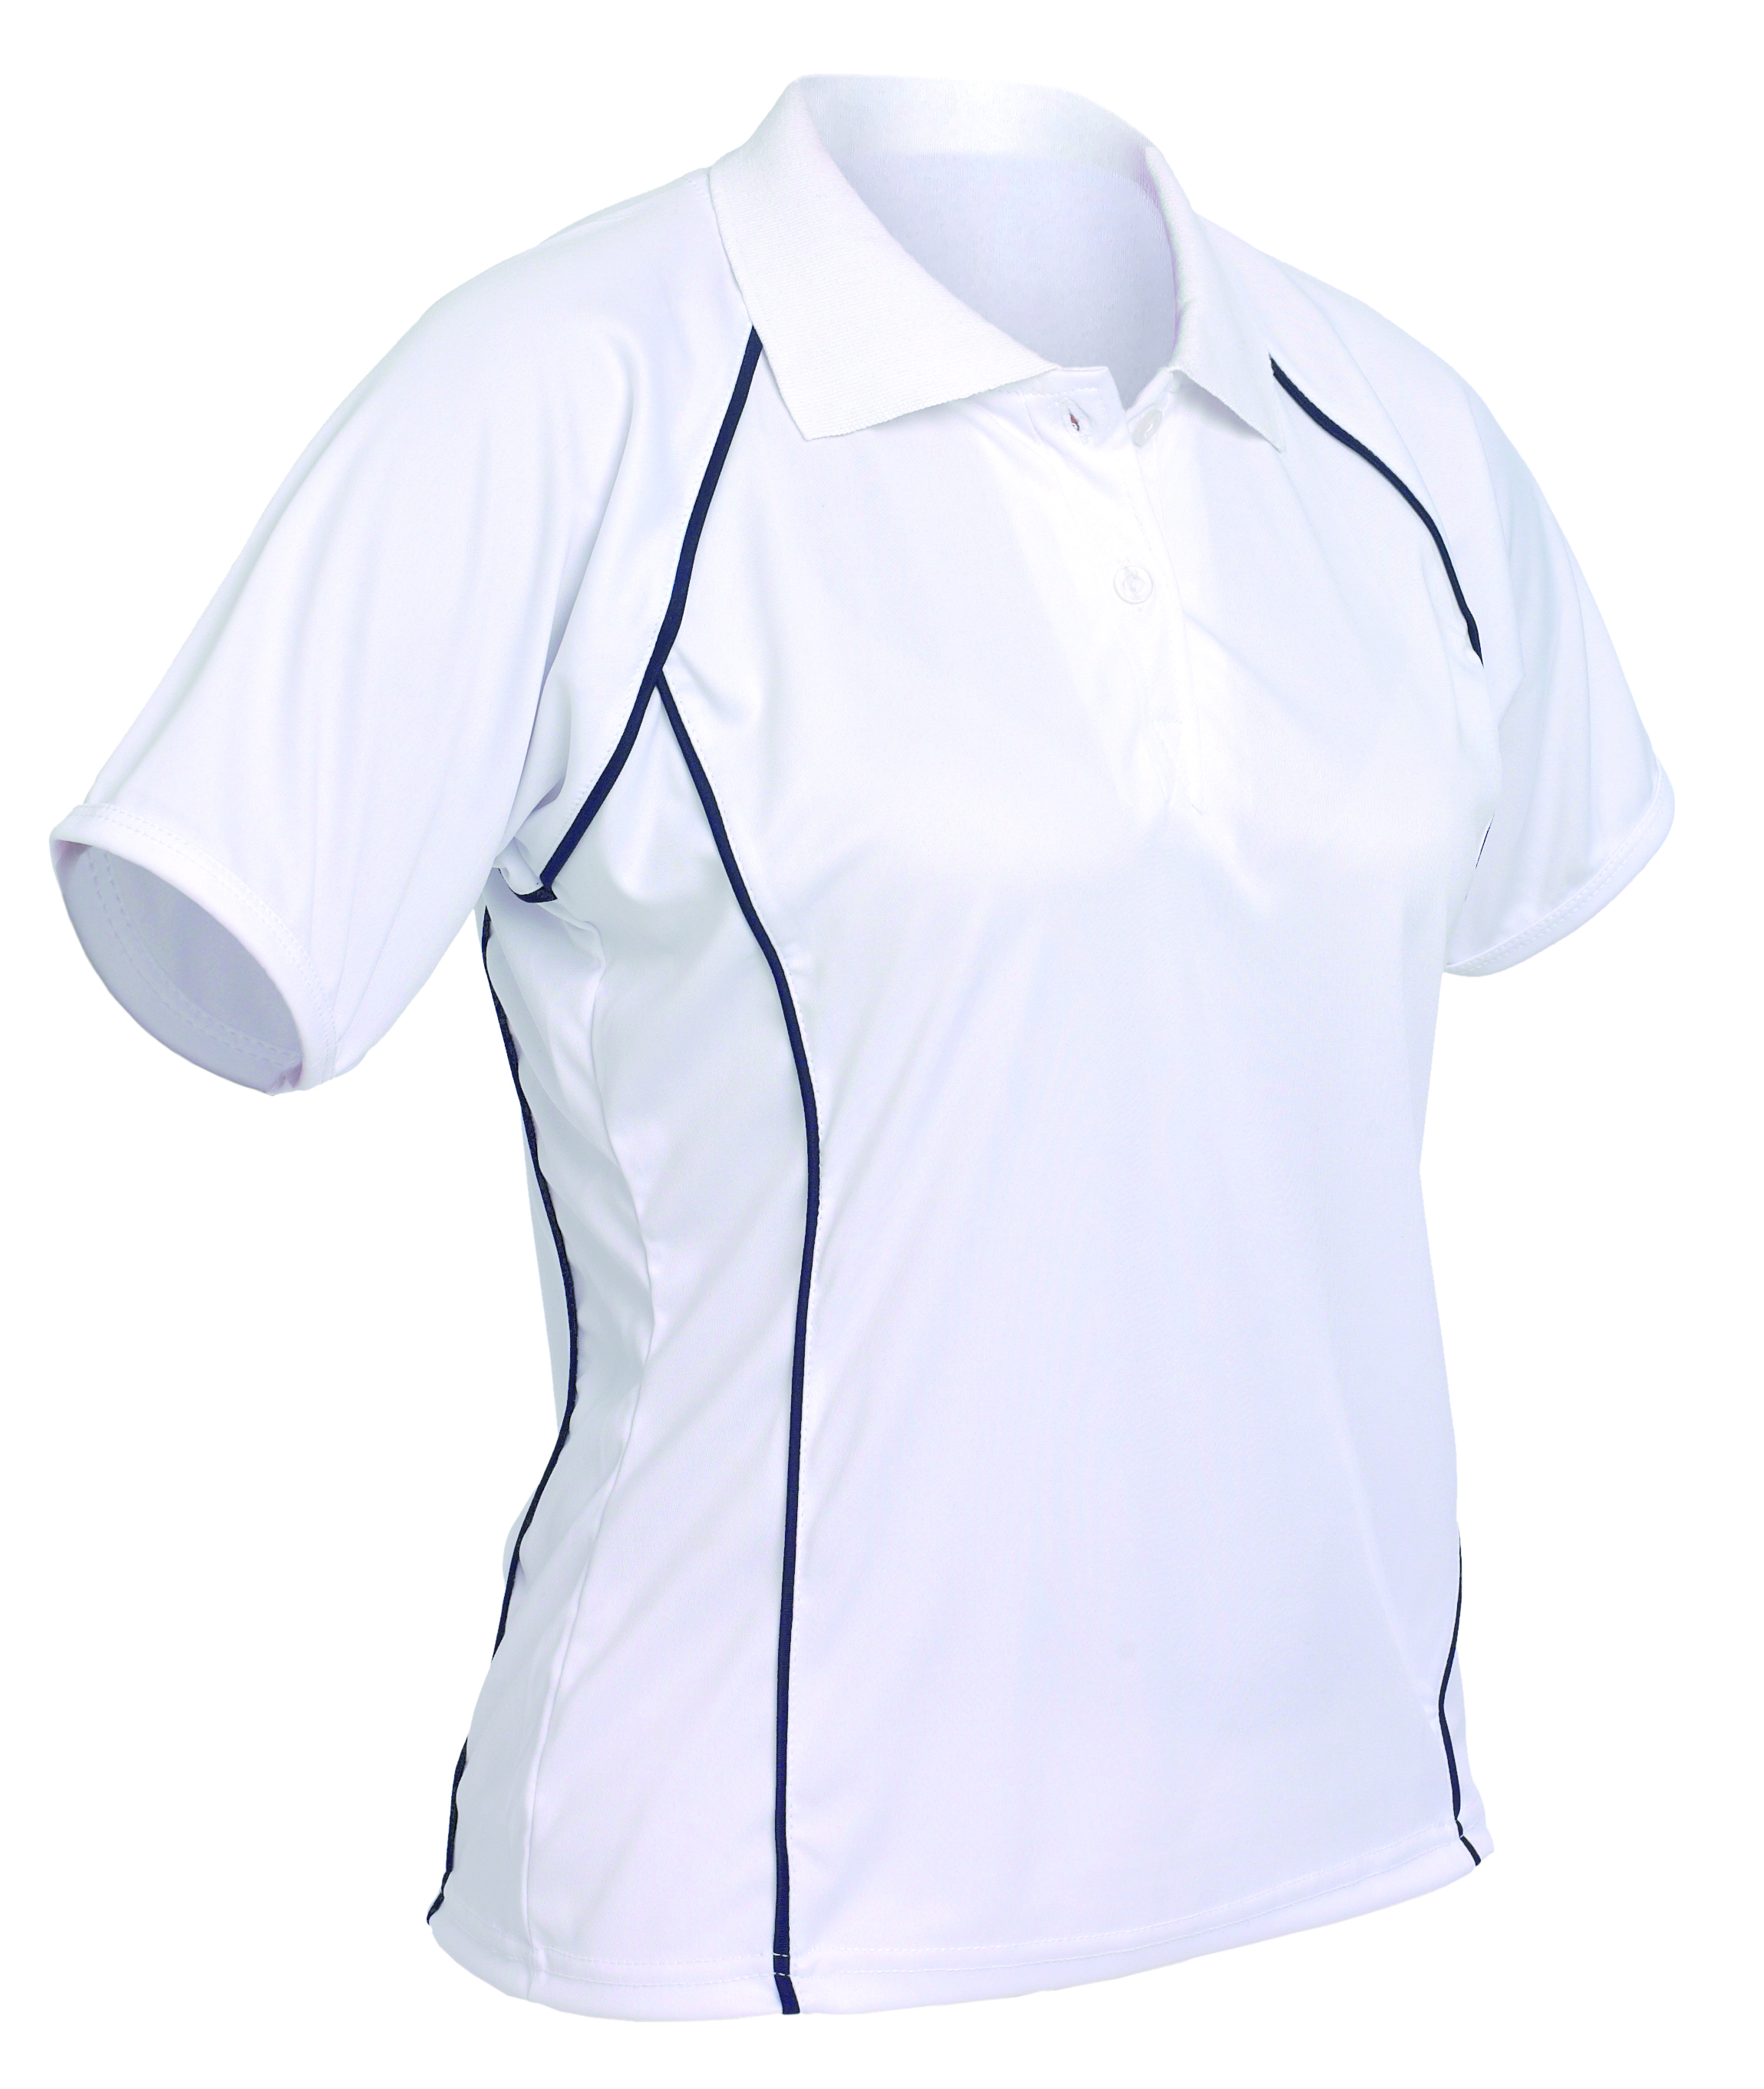 Falcon Girls Fitted Sports Top